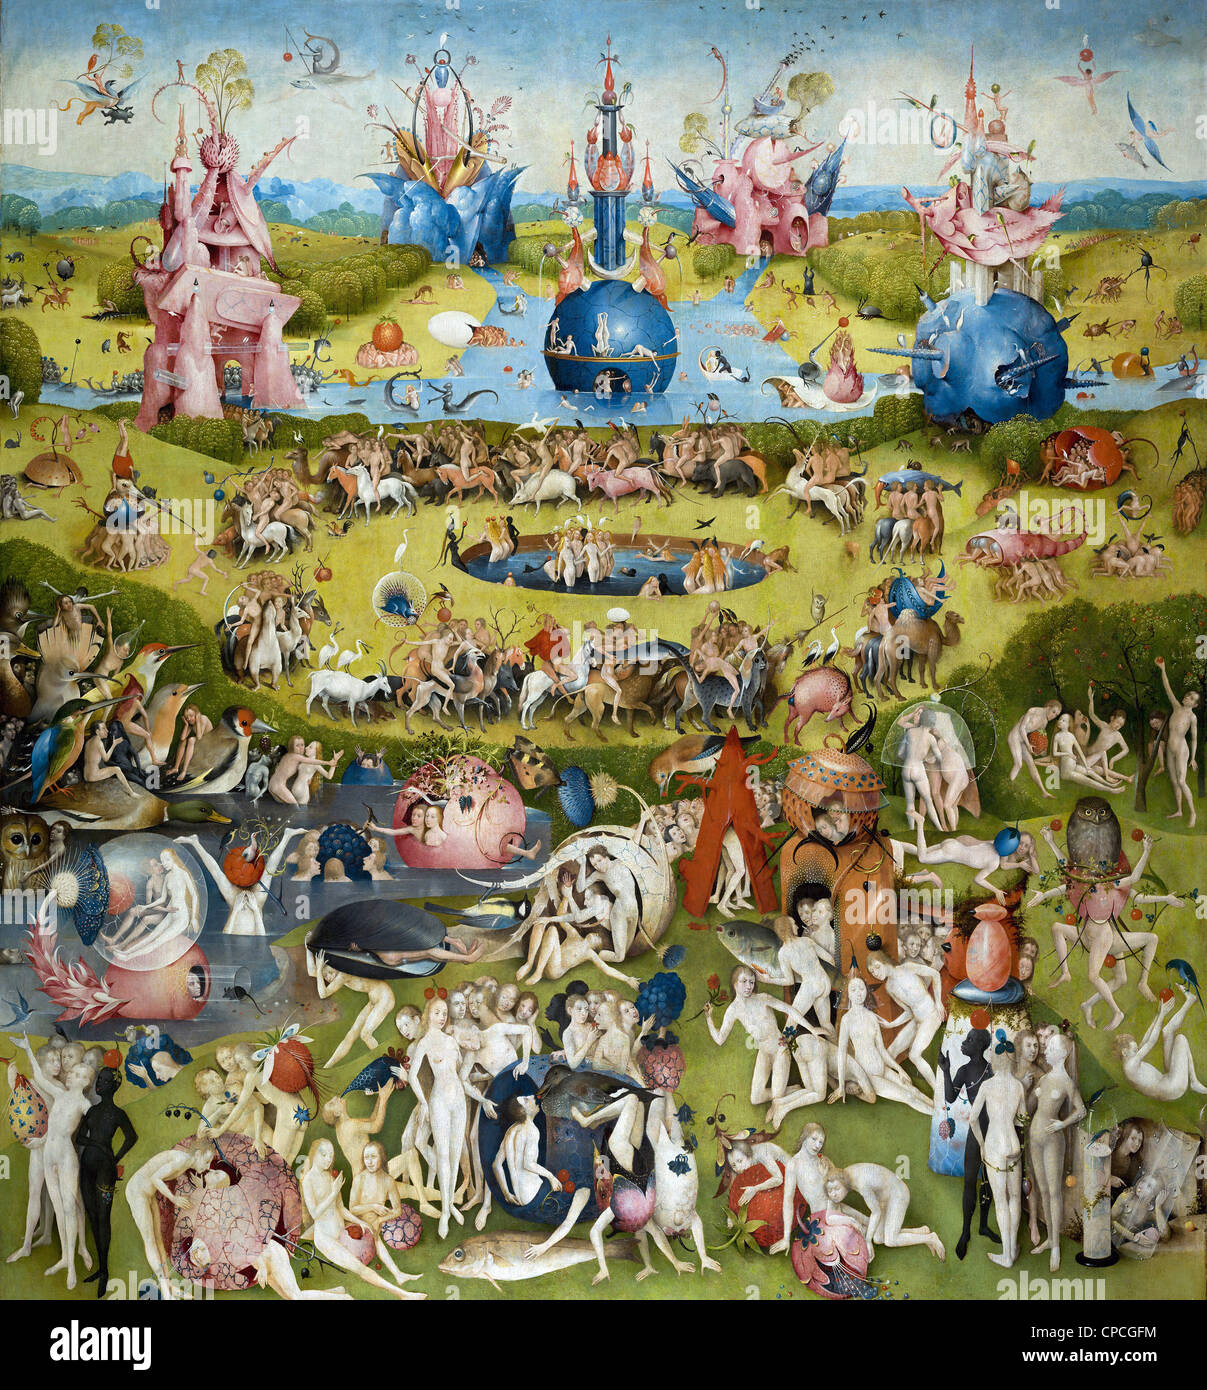 Hieronymus Bosch The Garden of Earthly Delights (central panel) 1504 Prado museum - Madrid Stock Photo